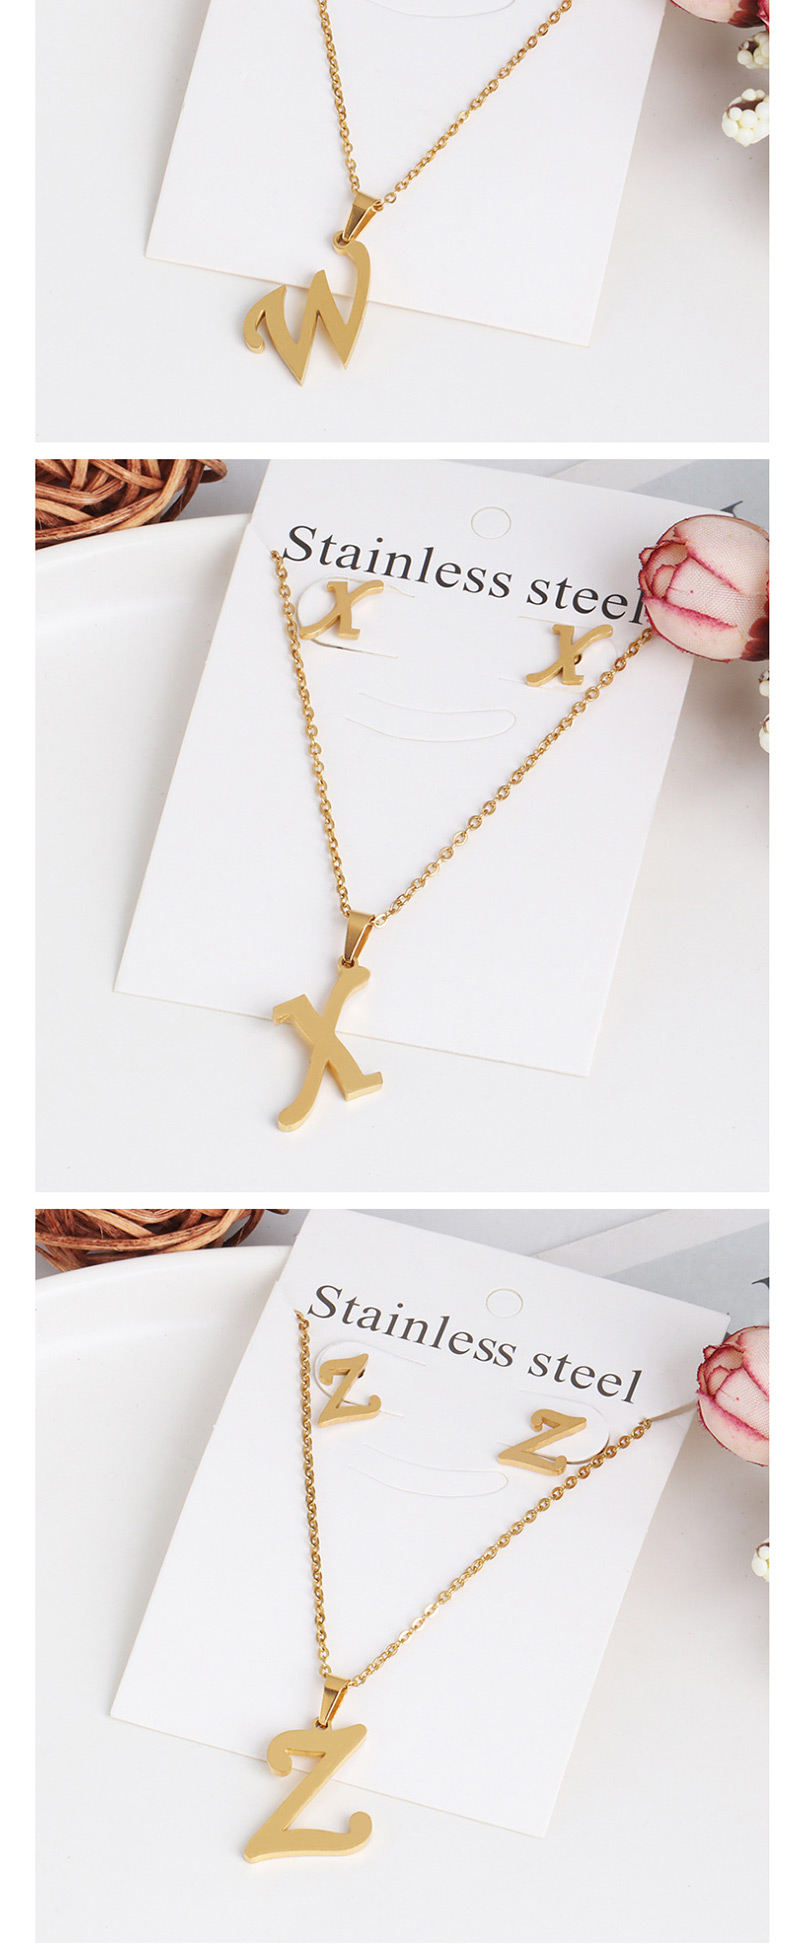 Fashion N Gold Stainless Steel Letter Necklace Earrings Two-piece,Jewelry Sets